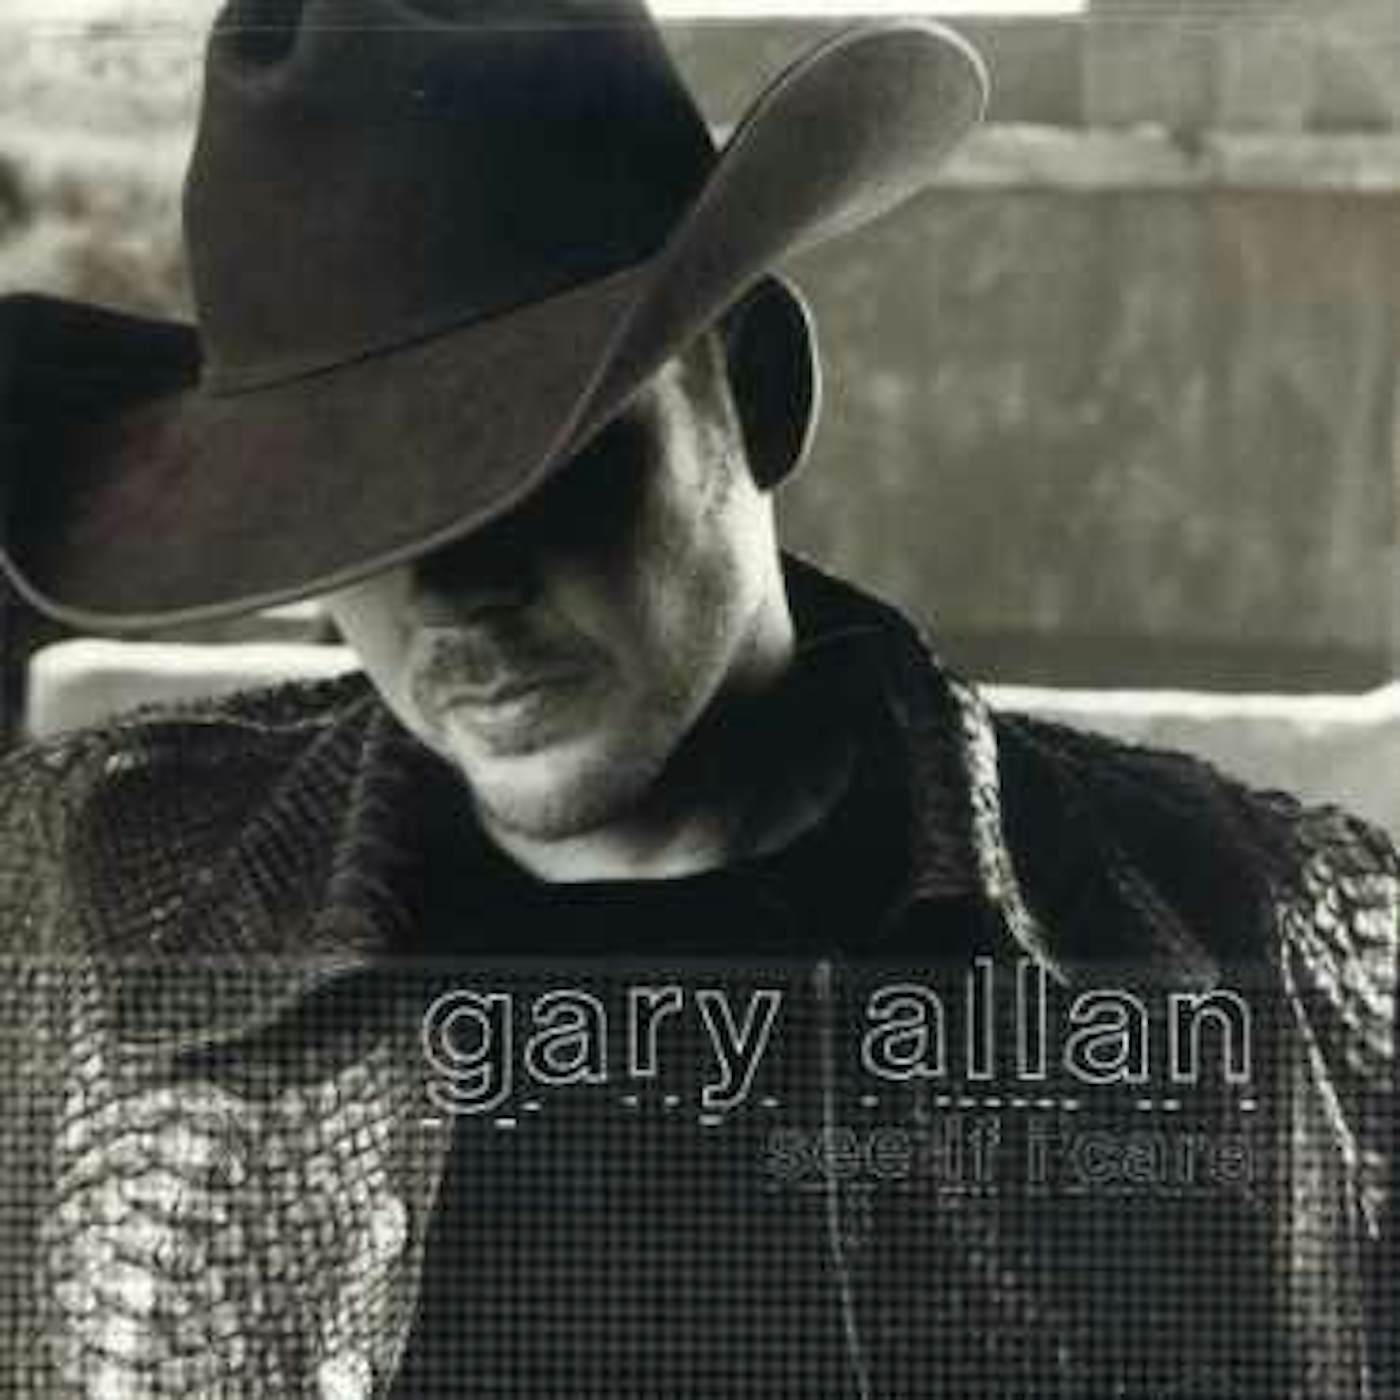 Gary Allan SEE IF I CARE CD